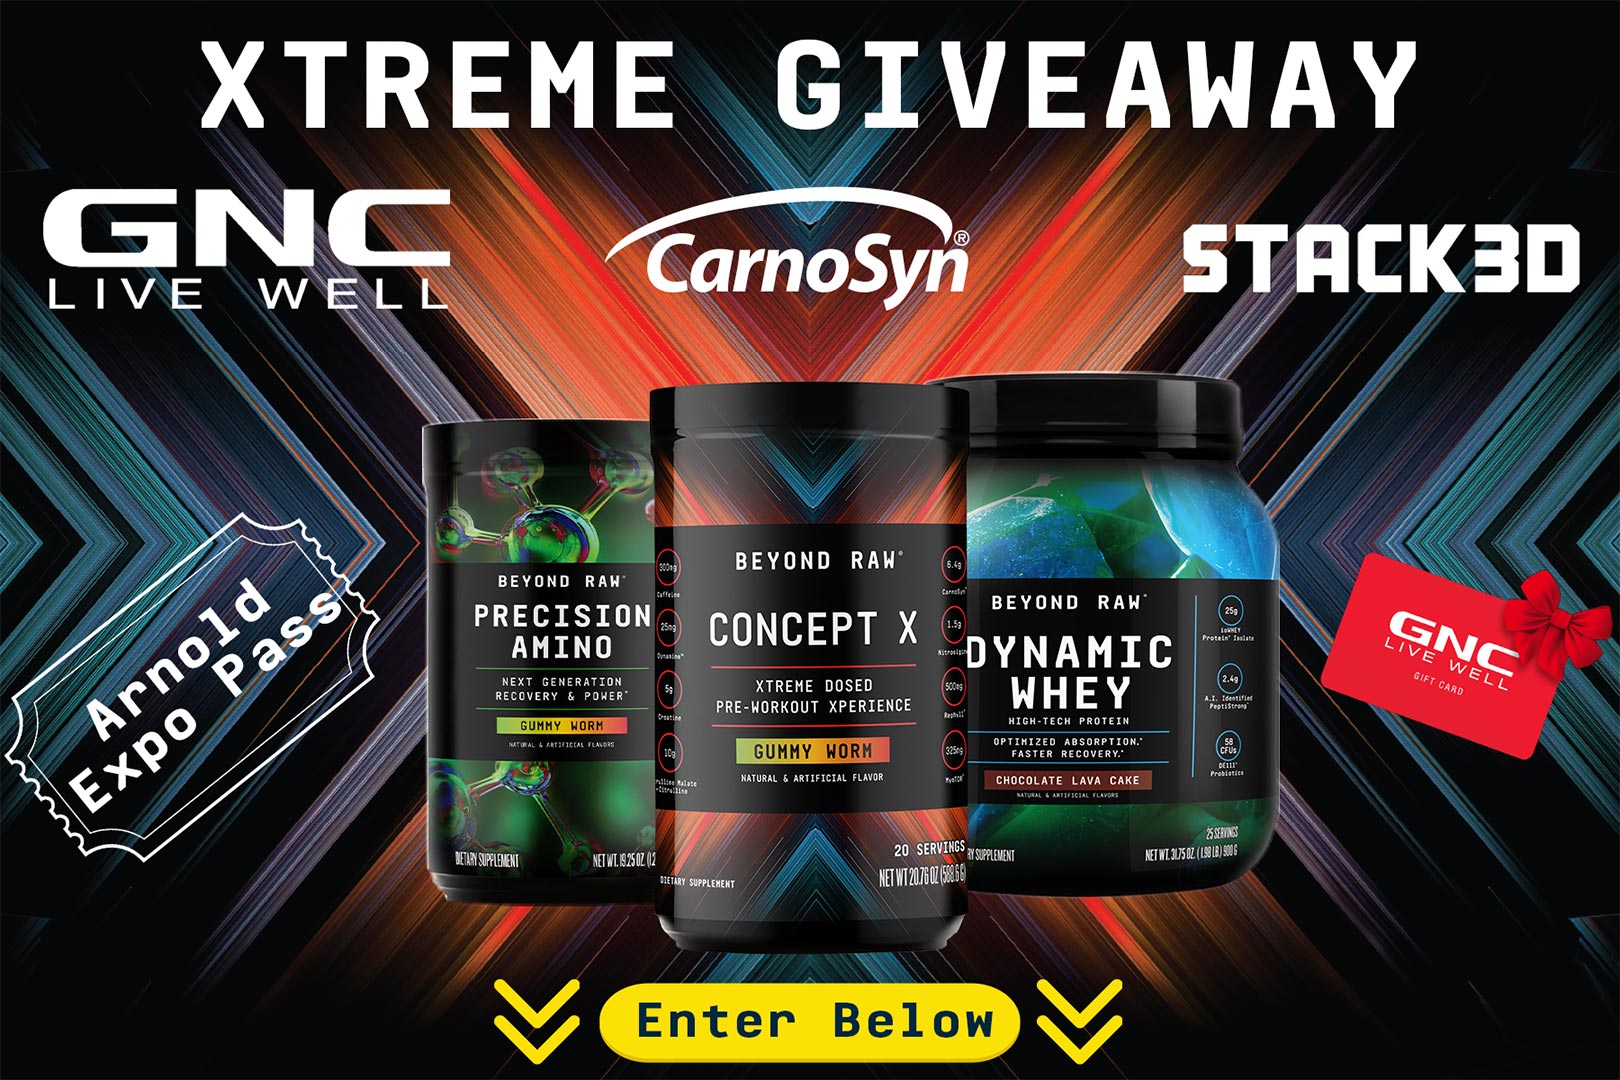 Xtreme Giveaway